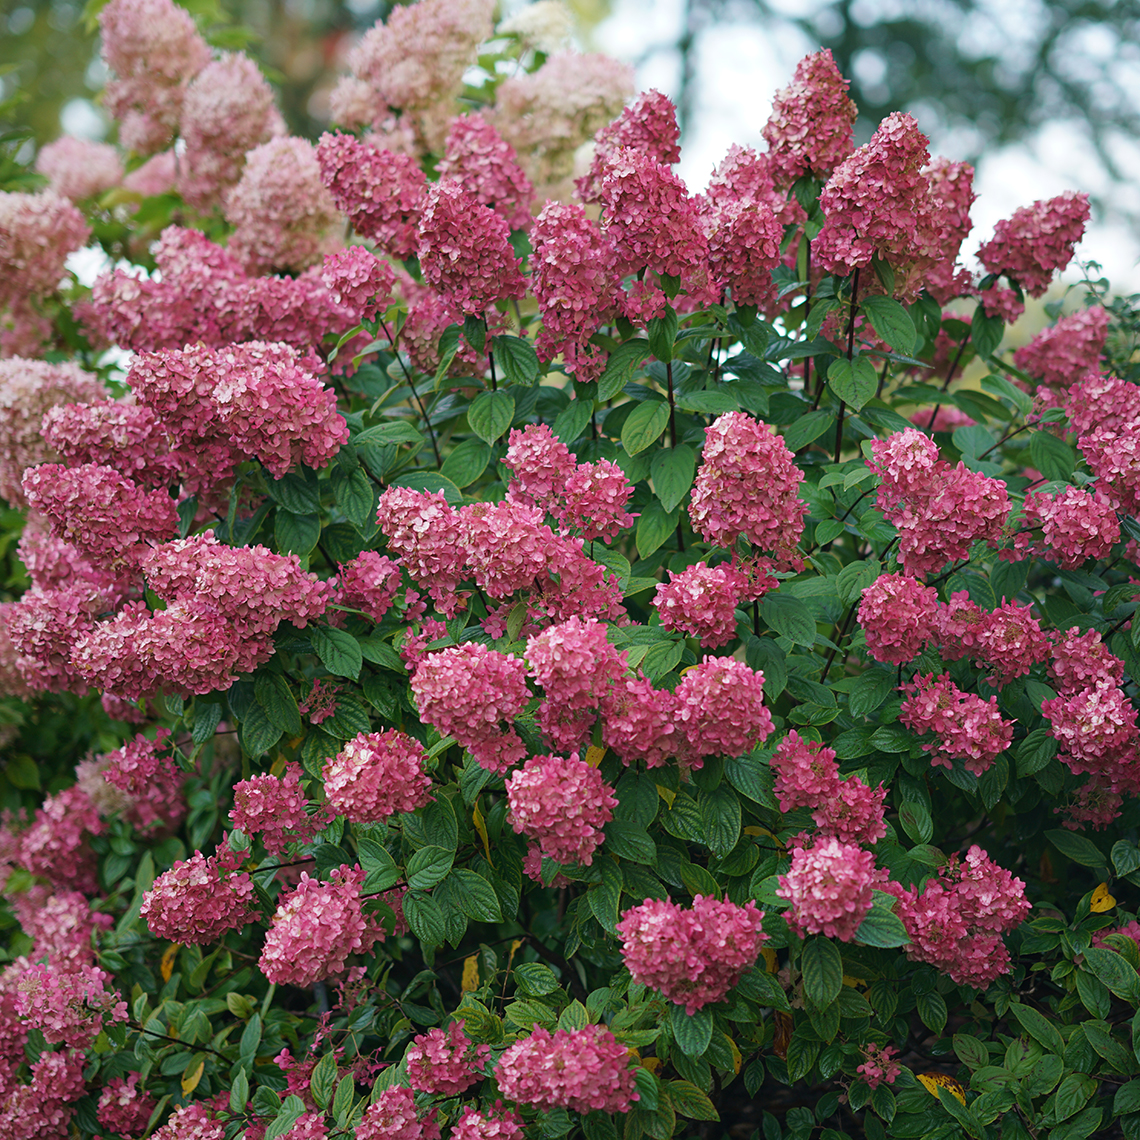 A specimen of Fire Light panicle hydrangea positively smothered in large red mophead blooms